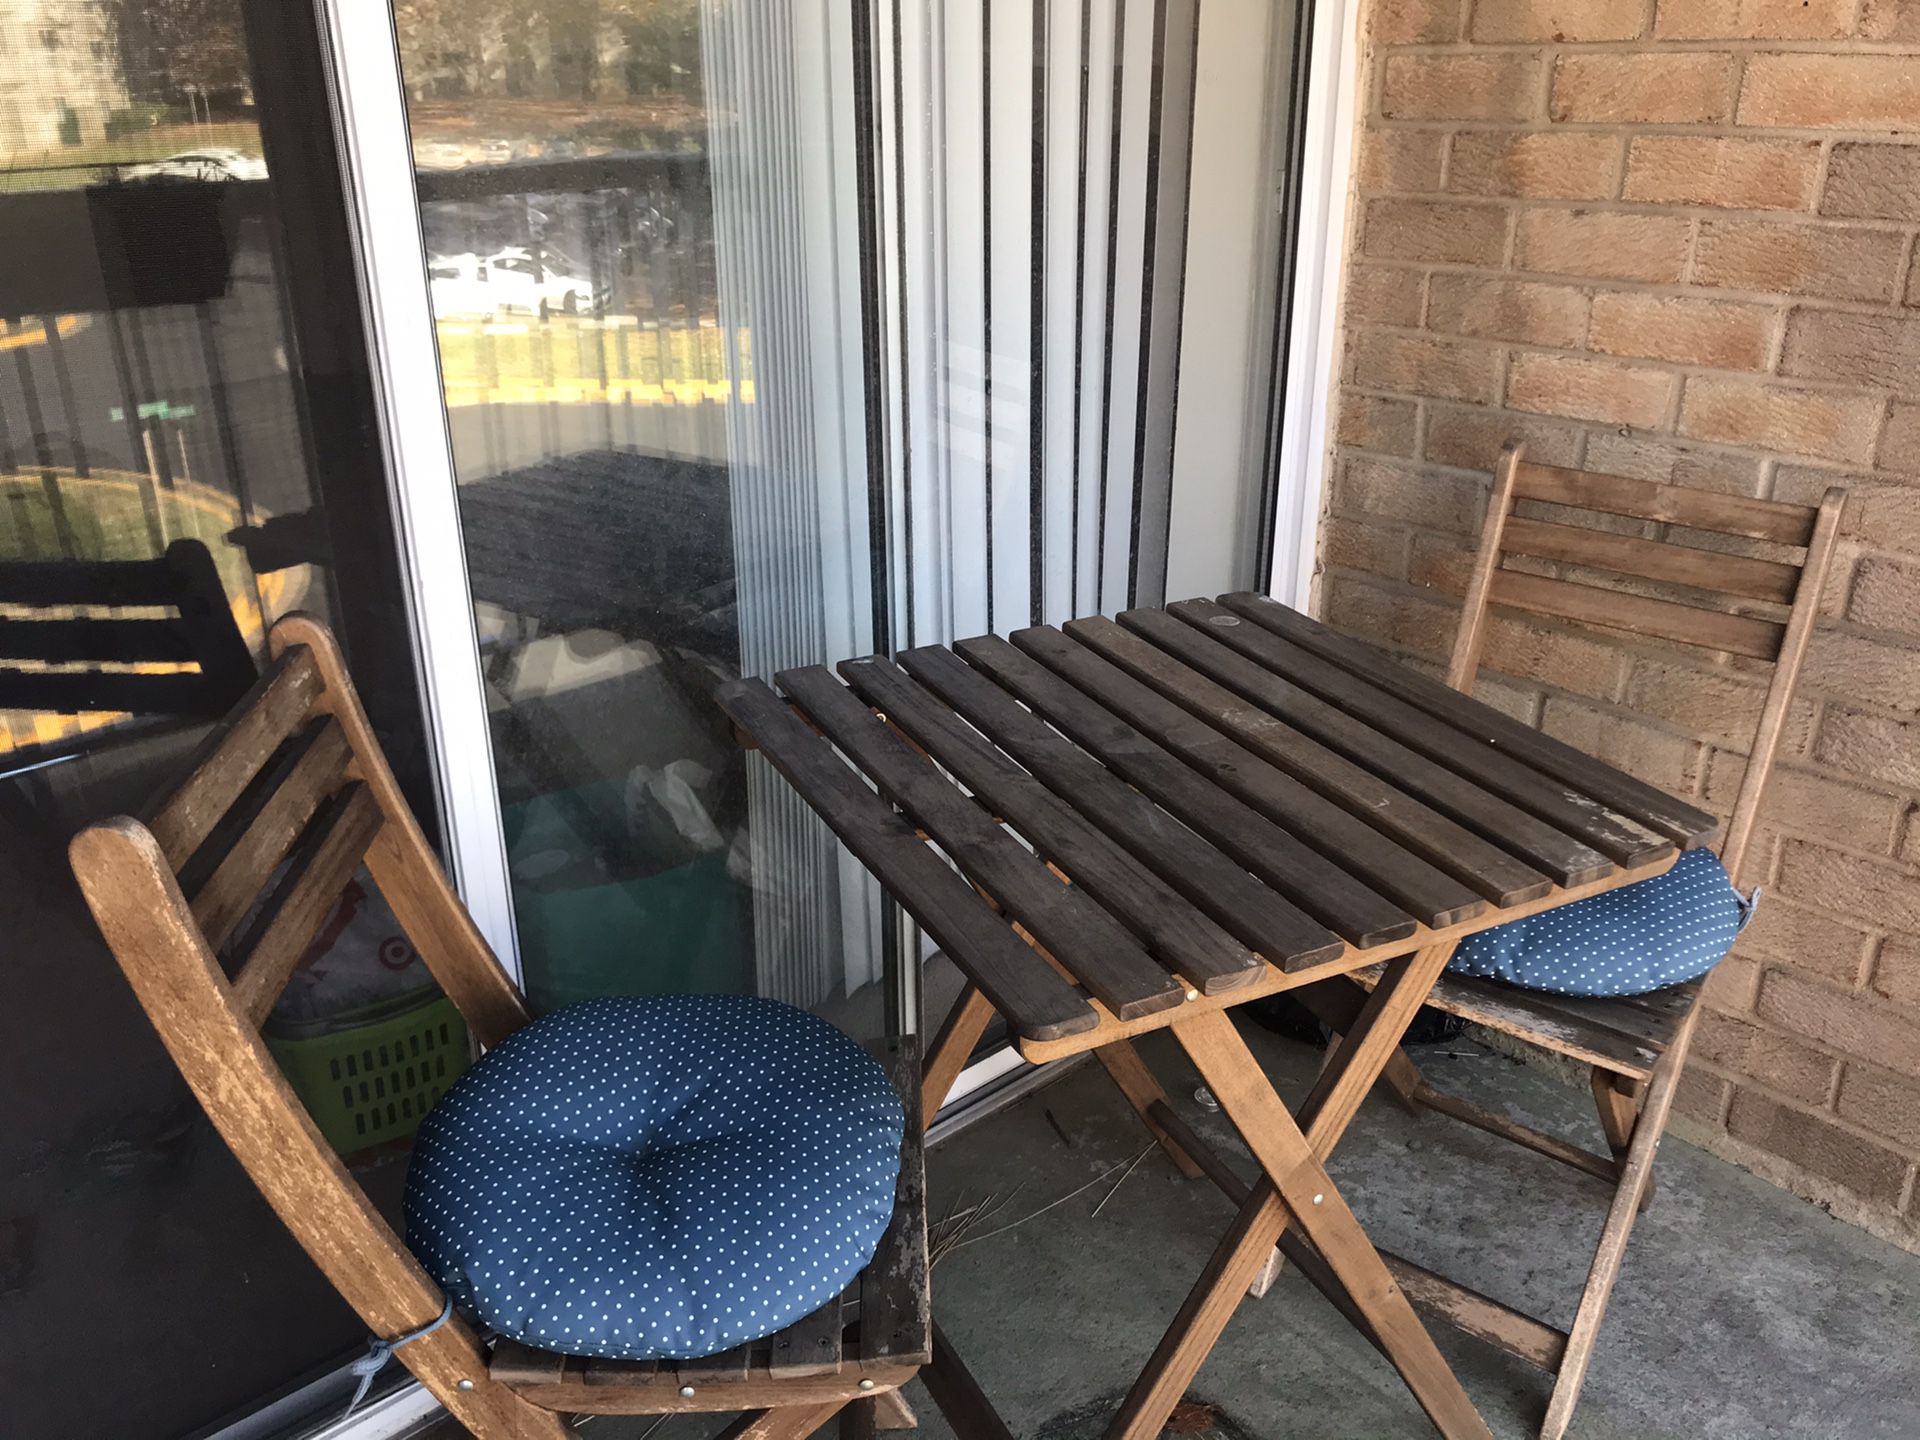 Outdoor furniture - table + 2 chairs